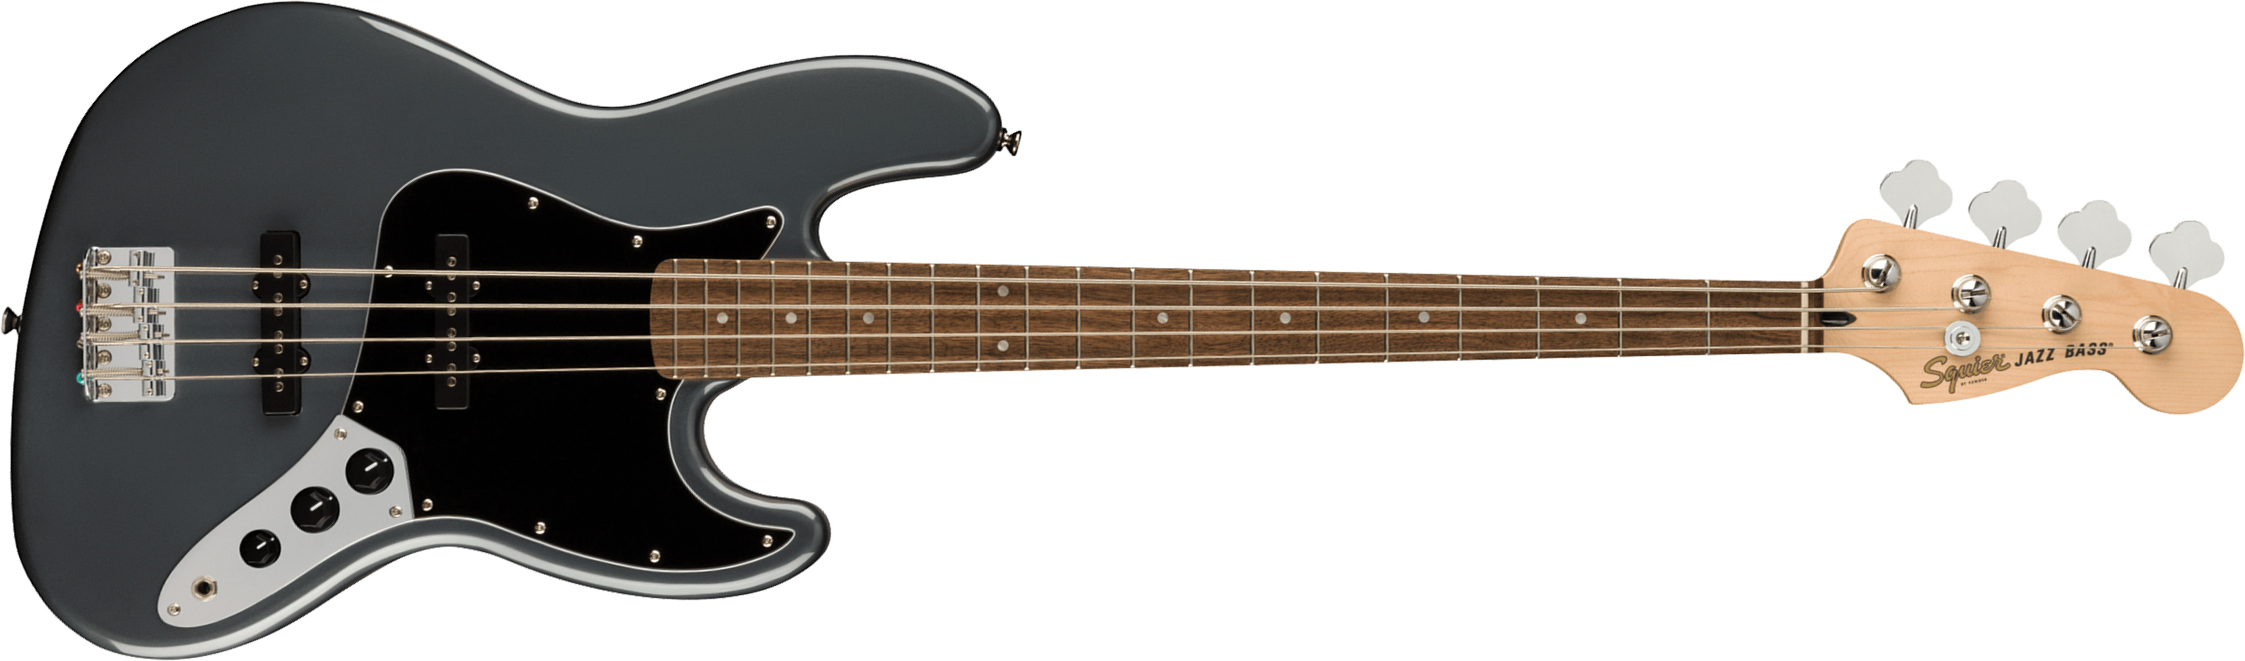 Squier Jazz Bass Affinity 2021 Lau - Charcoal Frost Metallic - Solid body electric bass - Main picture